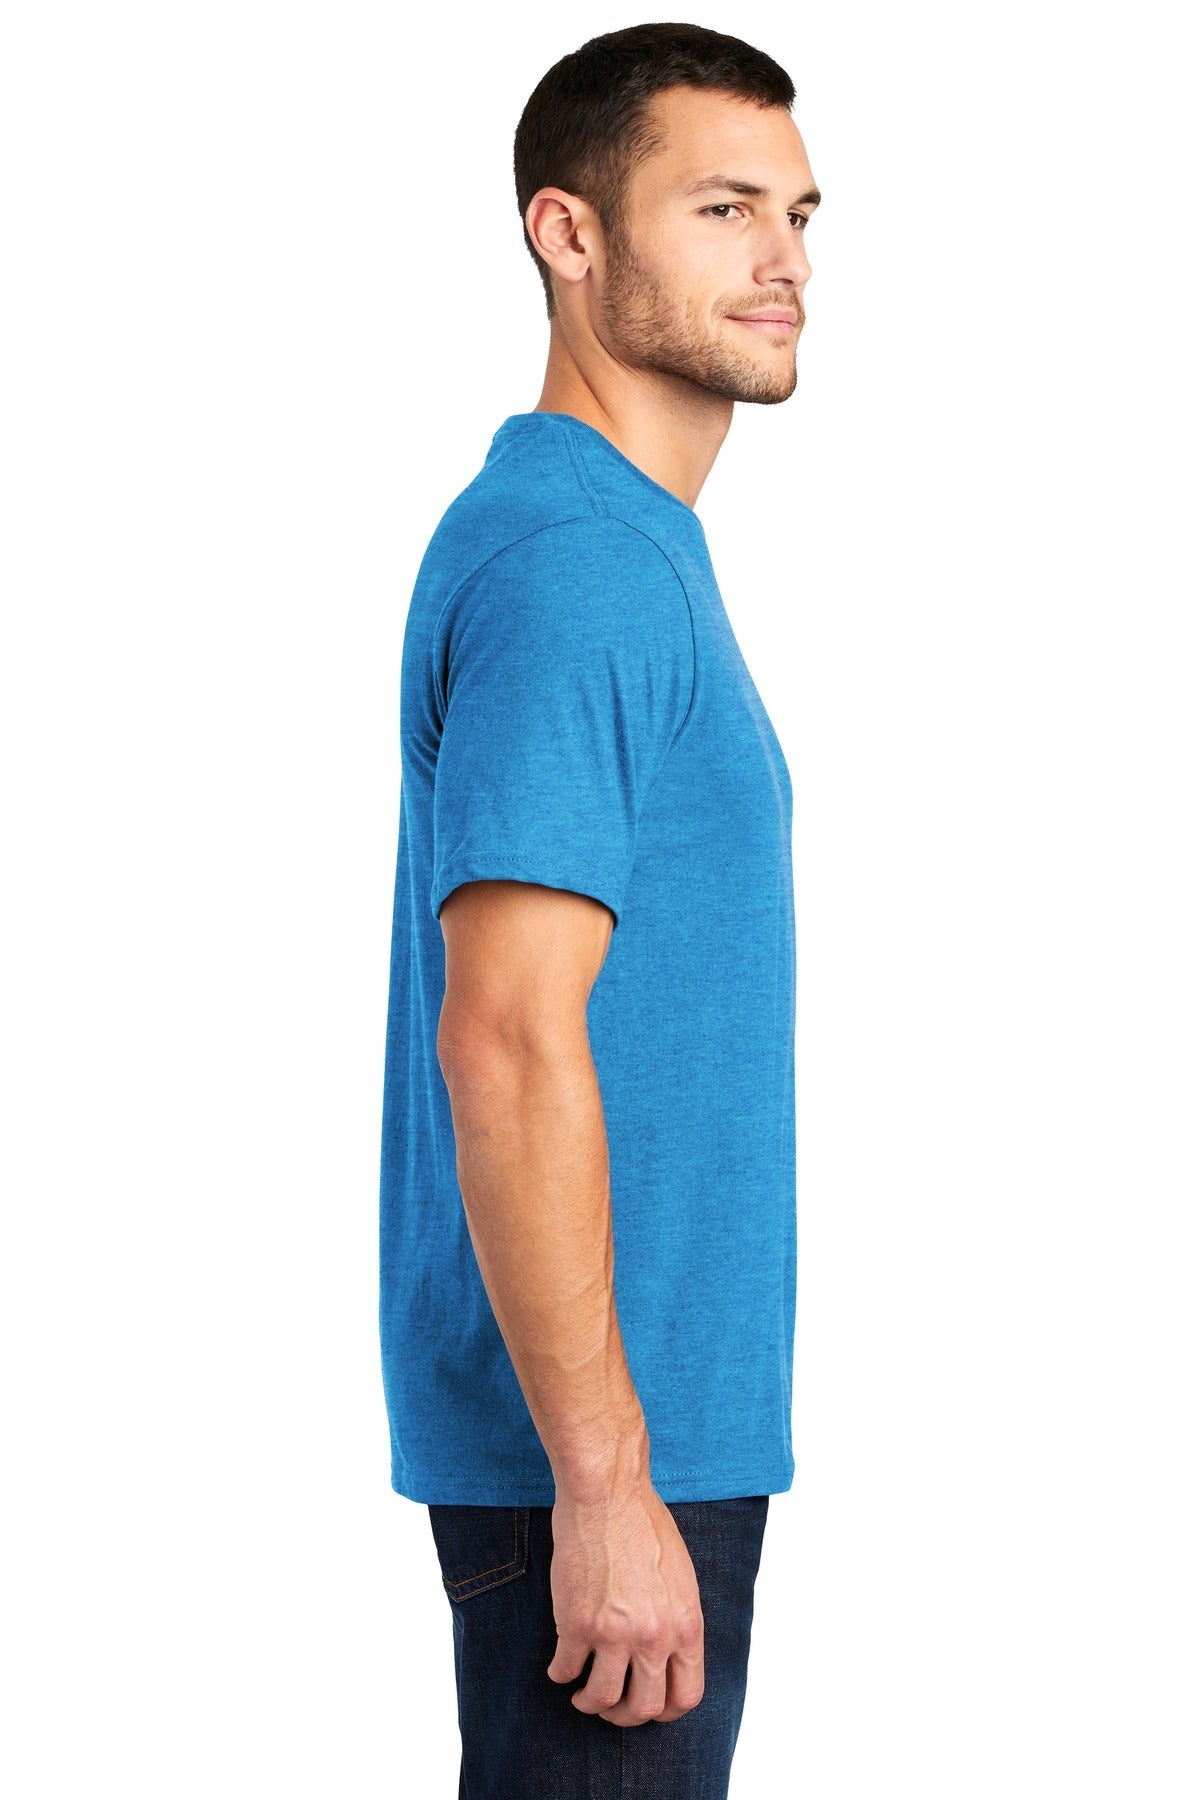 District® Very Important Tee®. DT6000 [Heathered Bright Turquoise] - DFW Impression